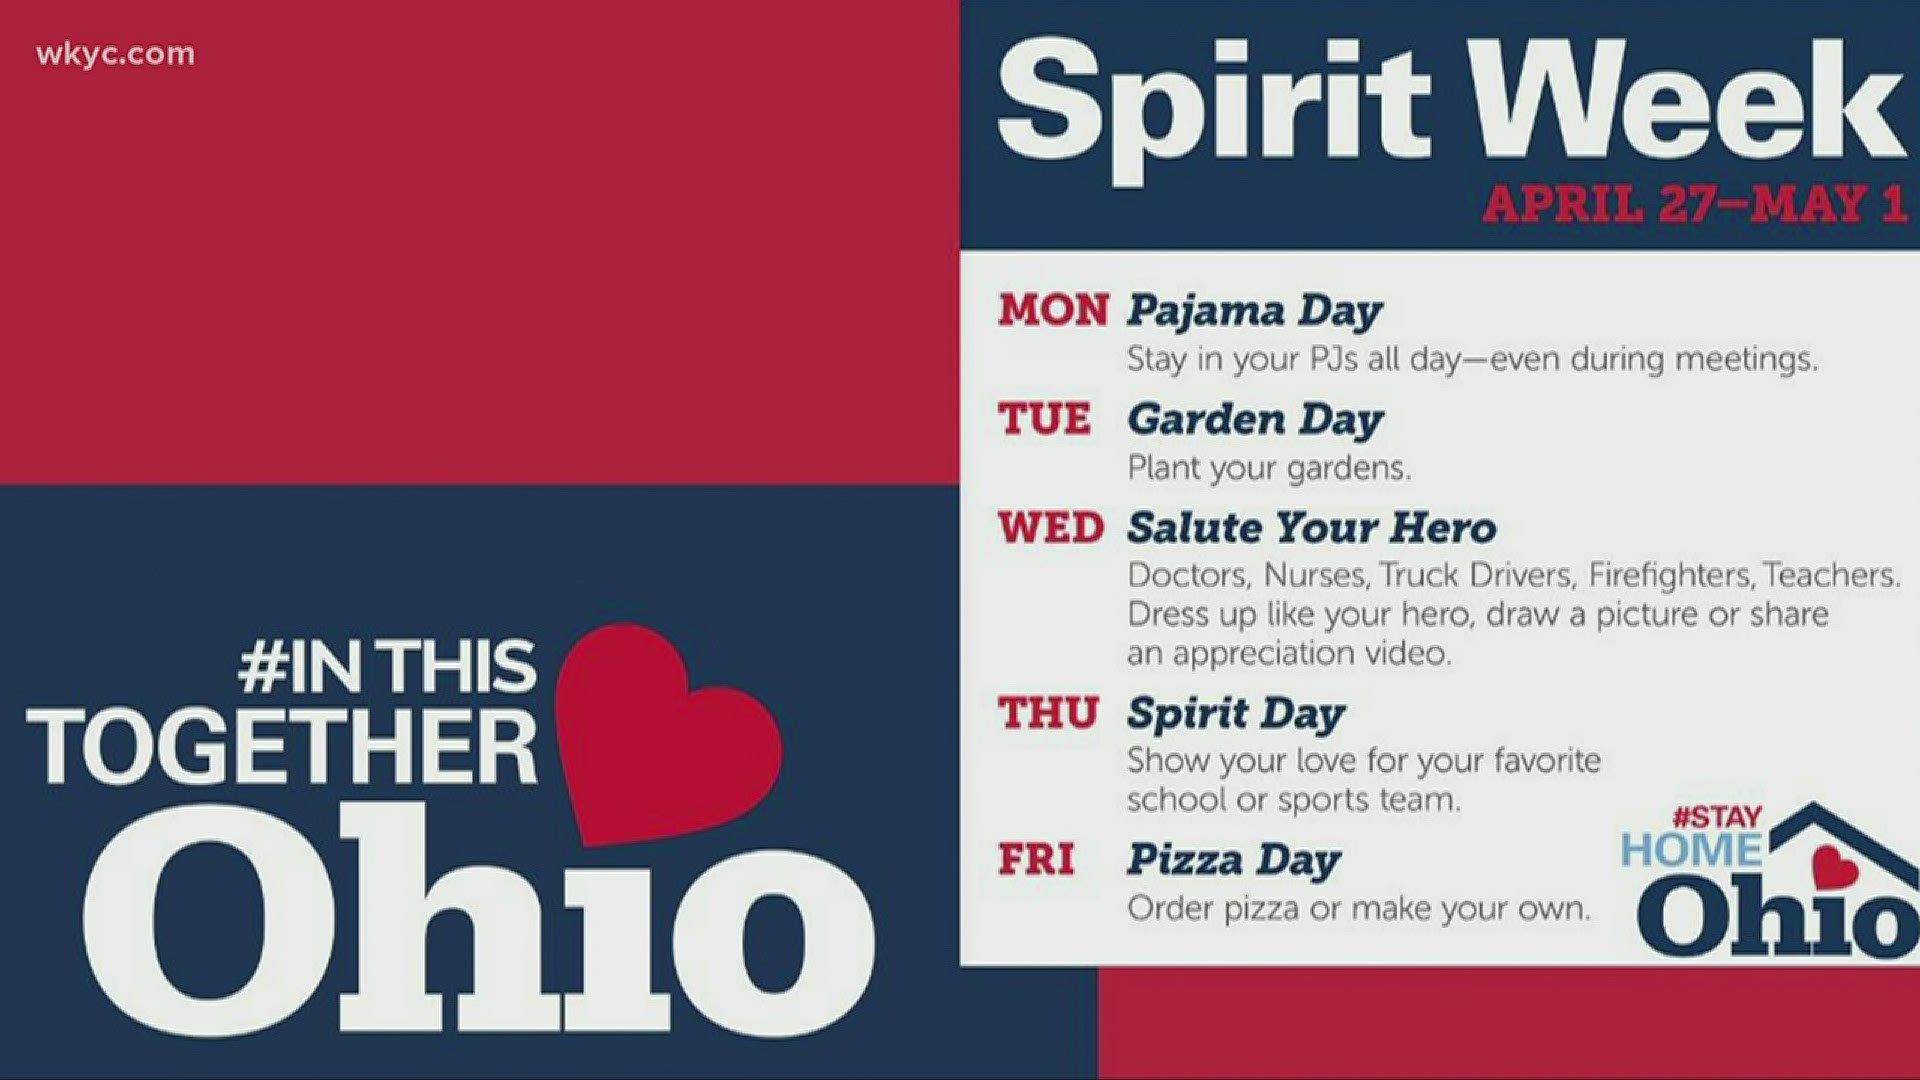 It's virtual 'Spirit Week' in Ohio. Gov. Mike DeWine said it all kicks off with Pajama Day today. Everybody throughout the state is encouraged to stay in their PJs.